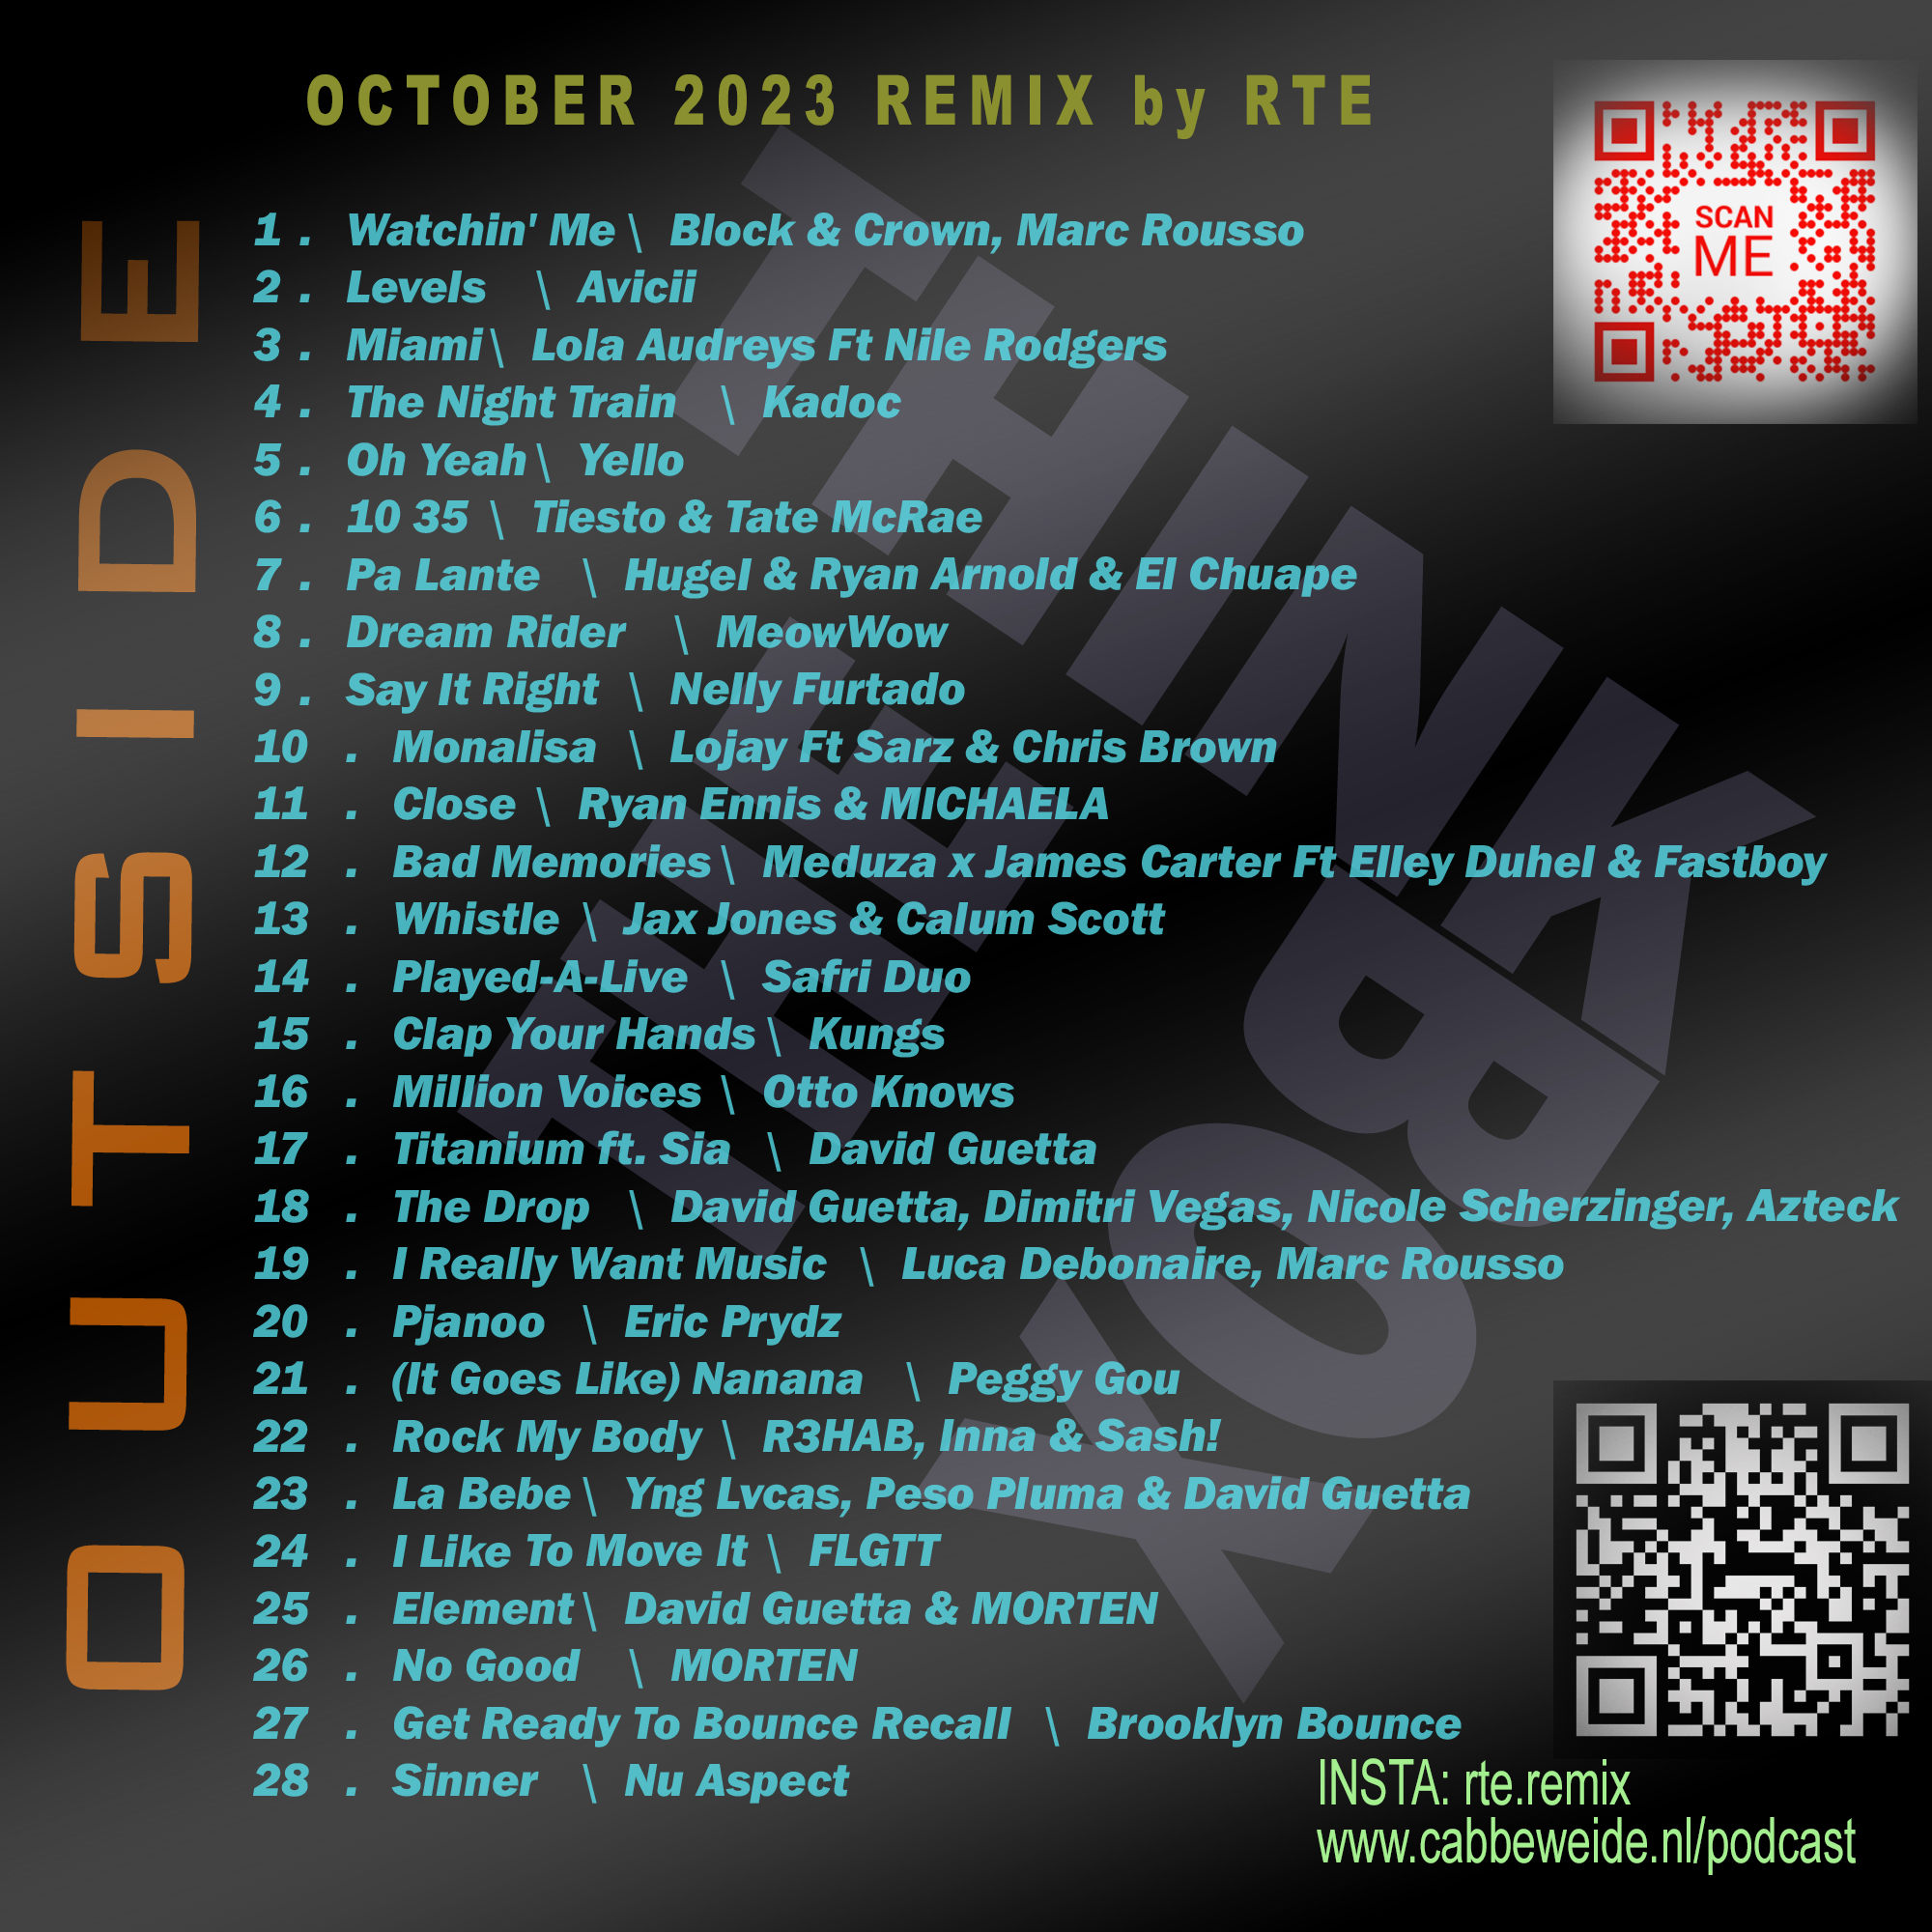 OCTOBER 2023 REMIX by RTE